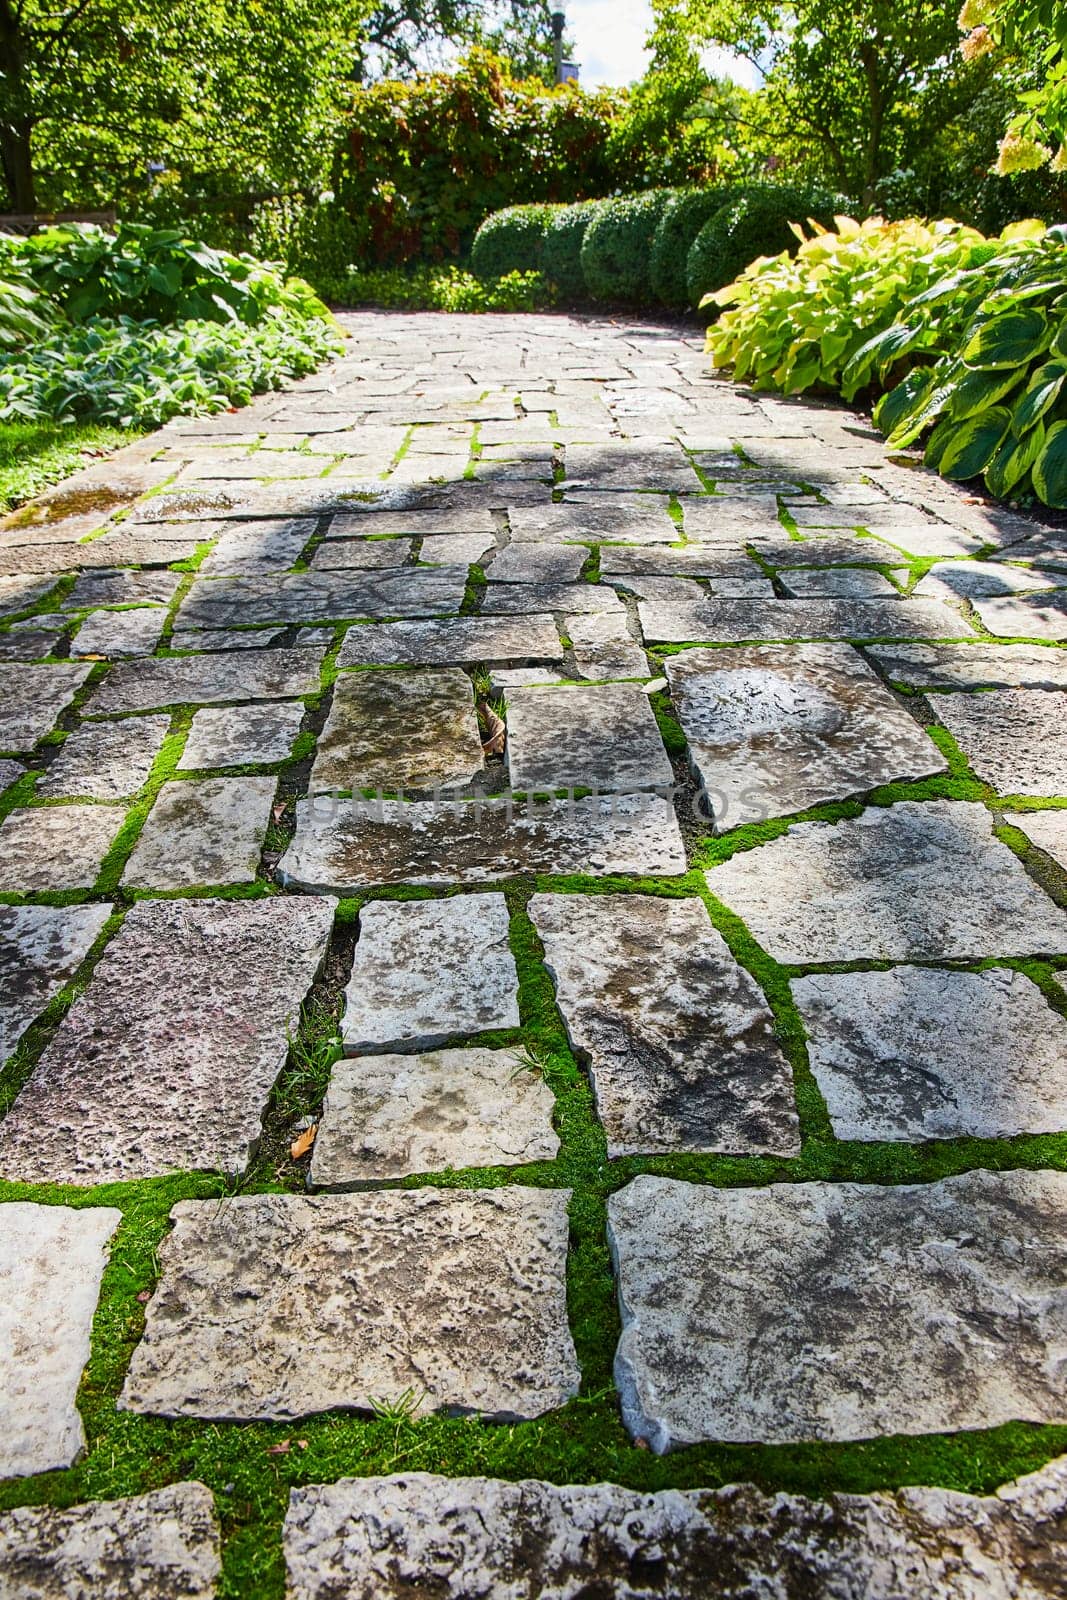 Stunning stone walkway through a lush, well-manicured garden in Botanic Gardens, Elkhart, Indiana, evoking tranquility and natural beauty.